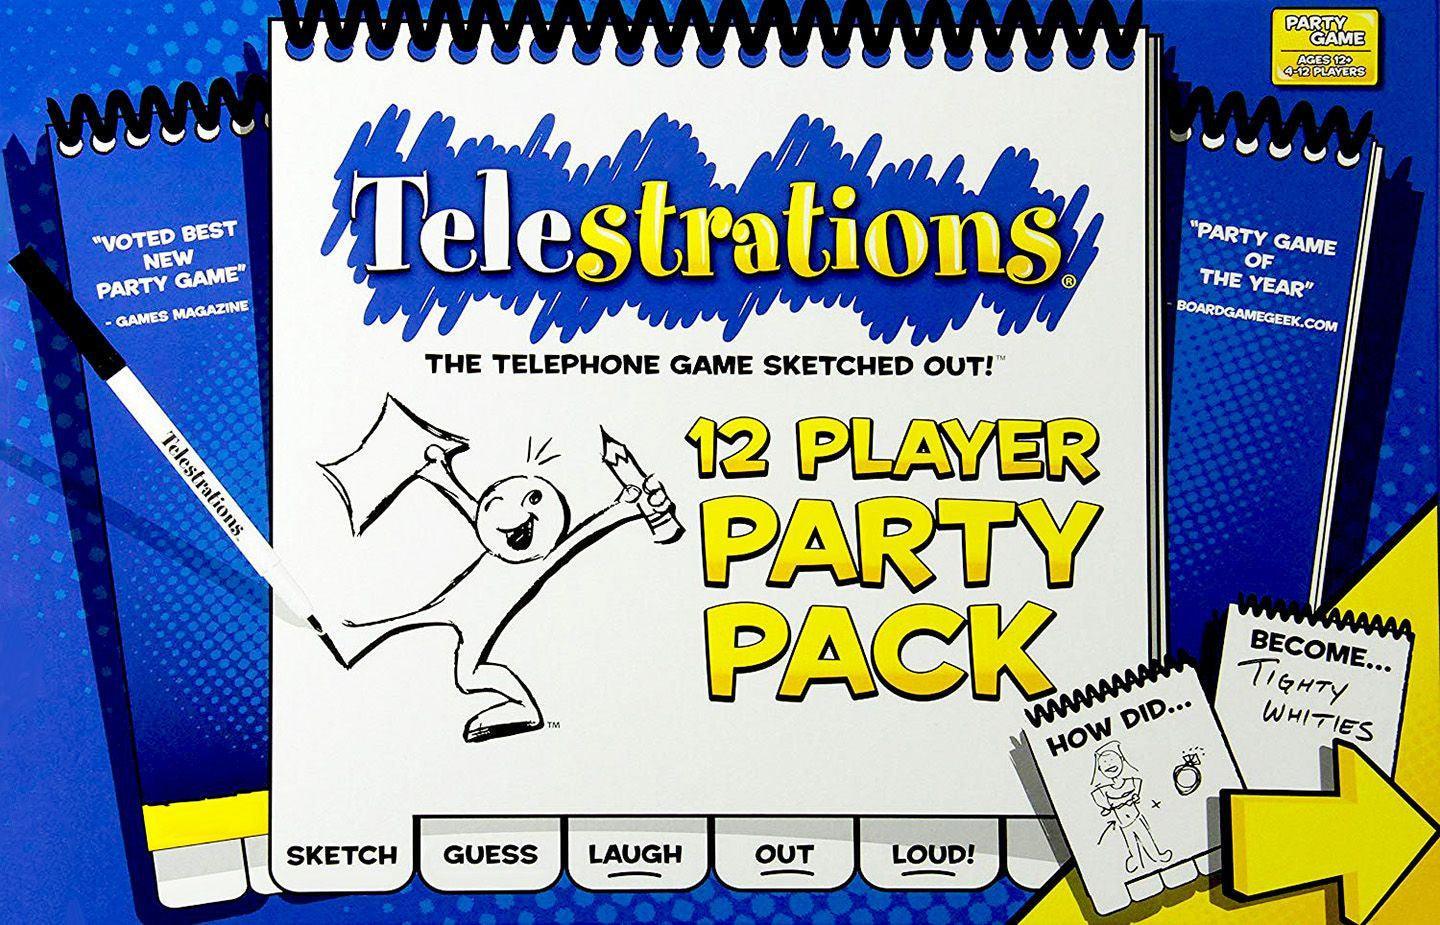 VR-96357 Telestrations 12 Player Party Pack - Crown & Andrews - Titan Pop Culture